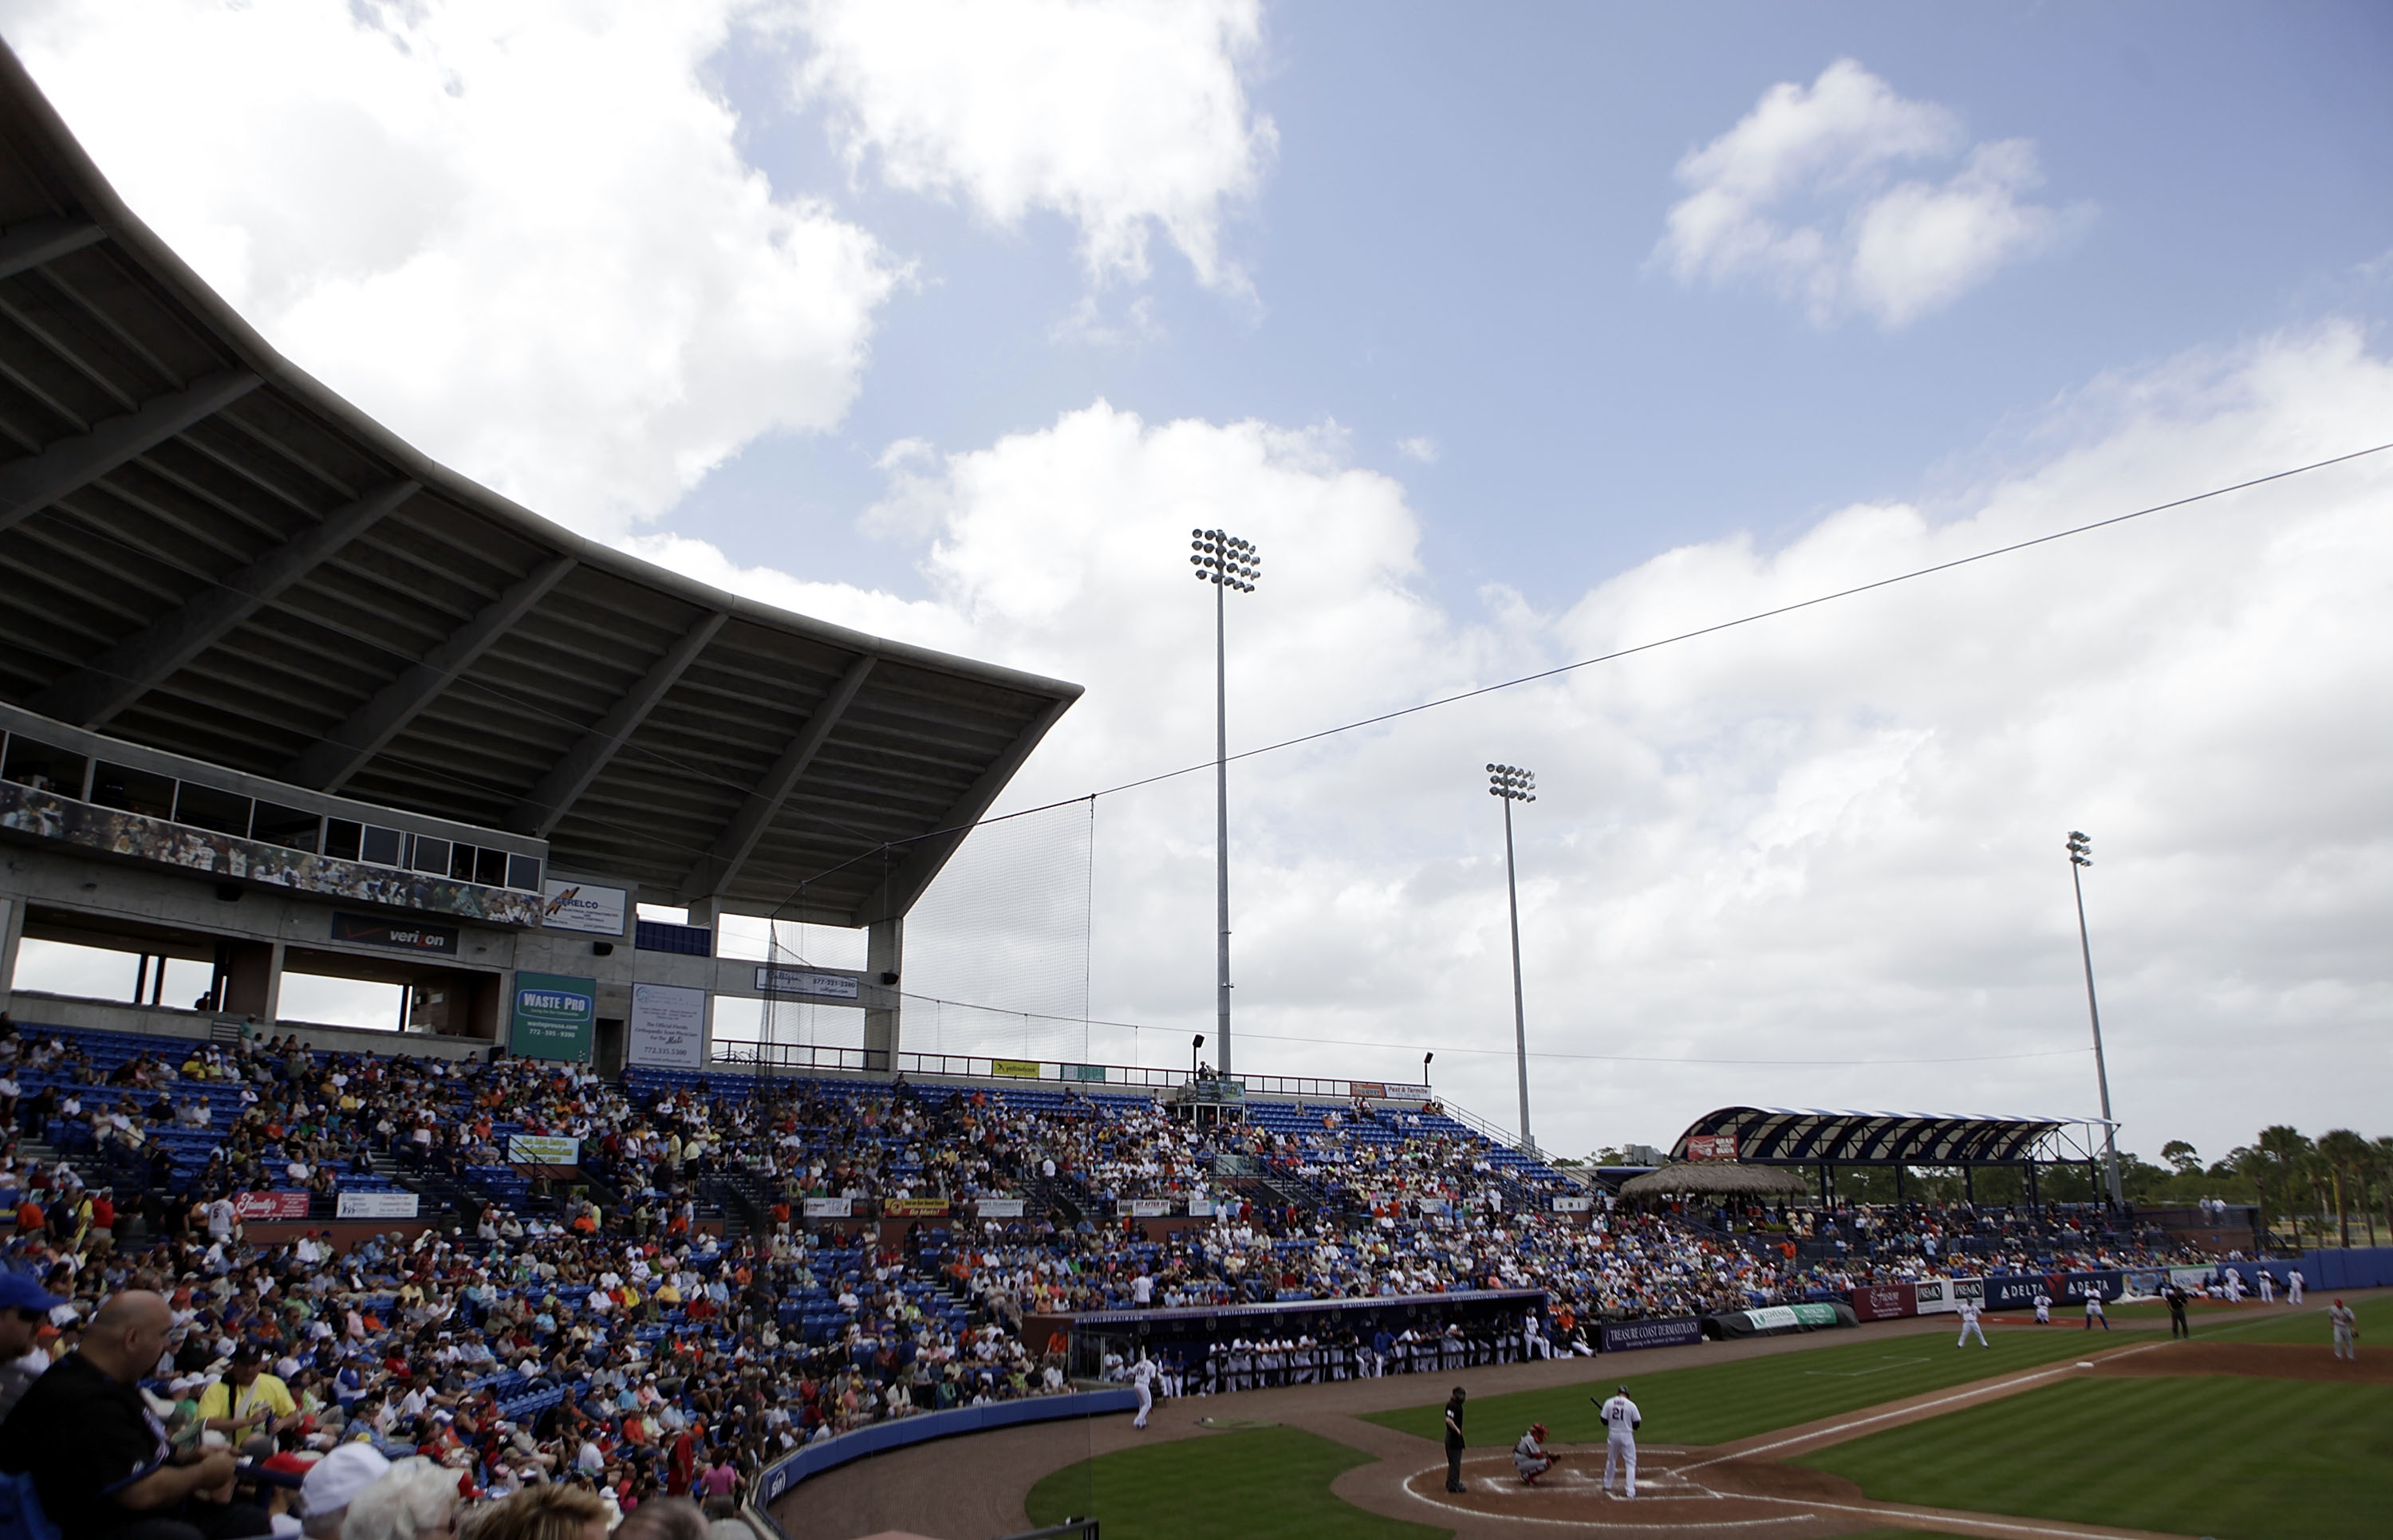 PORT ST. LUCIE, FL - MARCH 03: A general view as the St. Louis Cardinals play against the New York Mets at Digital Domain Park on March 3, 2011 in Port St. Lucie, Florida.  (Photo by Marc Serota/Getty Images)